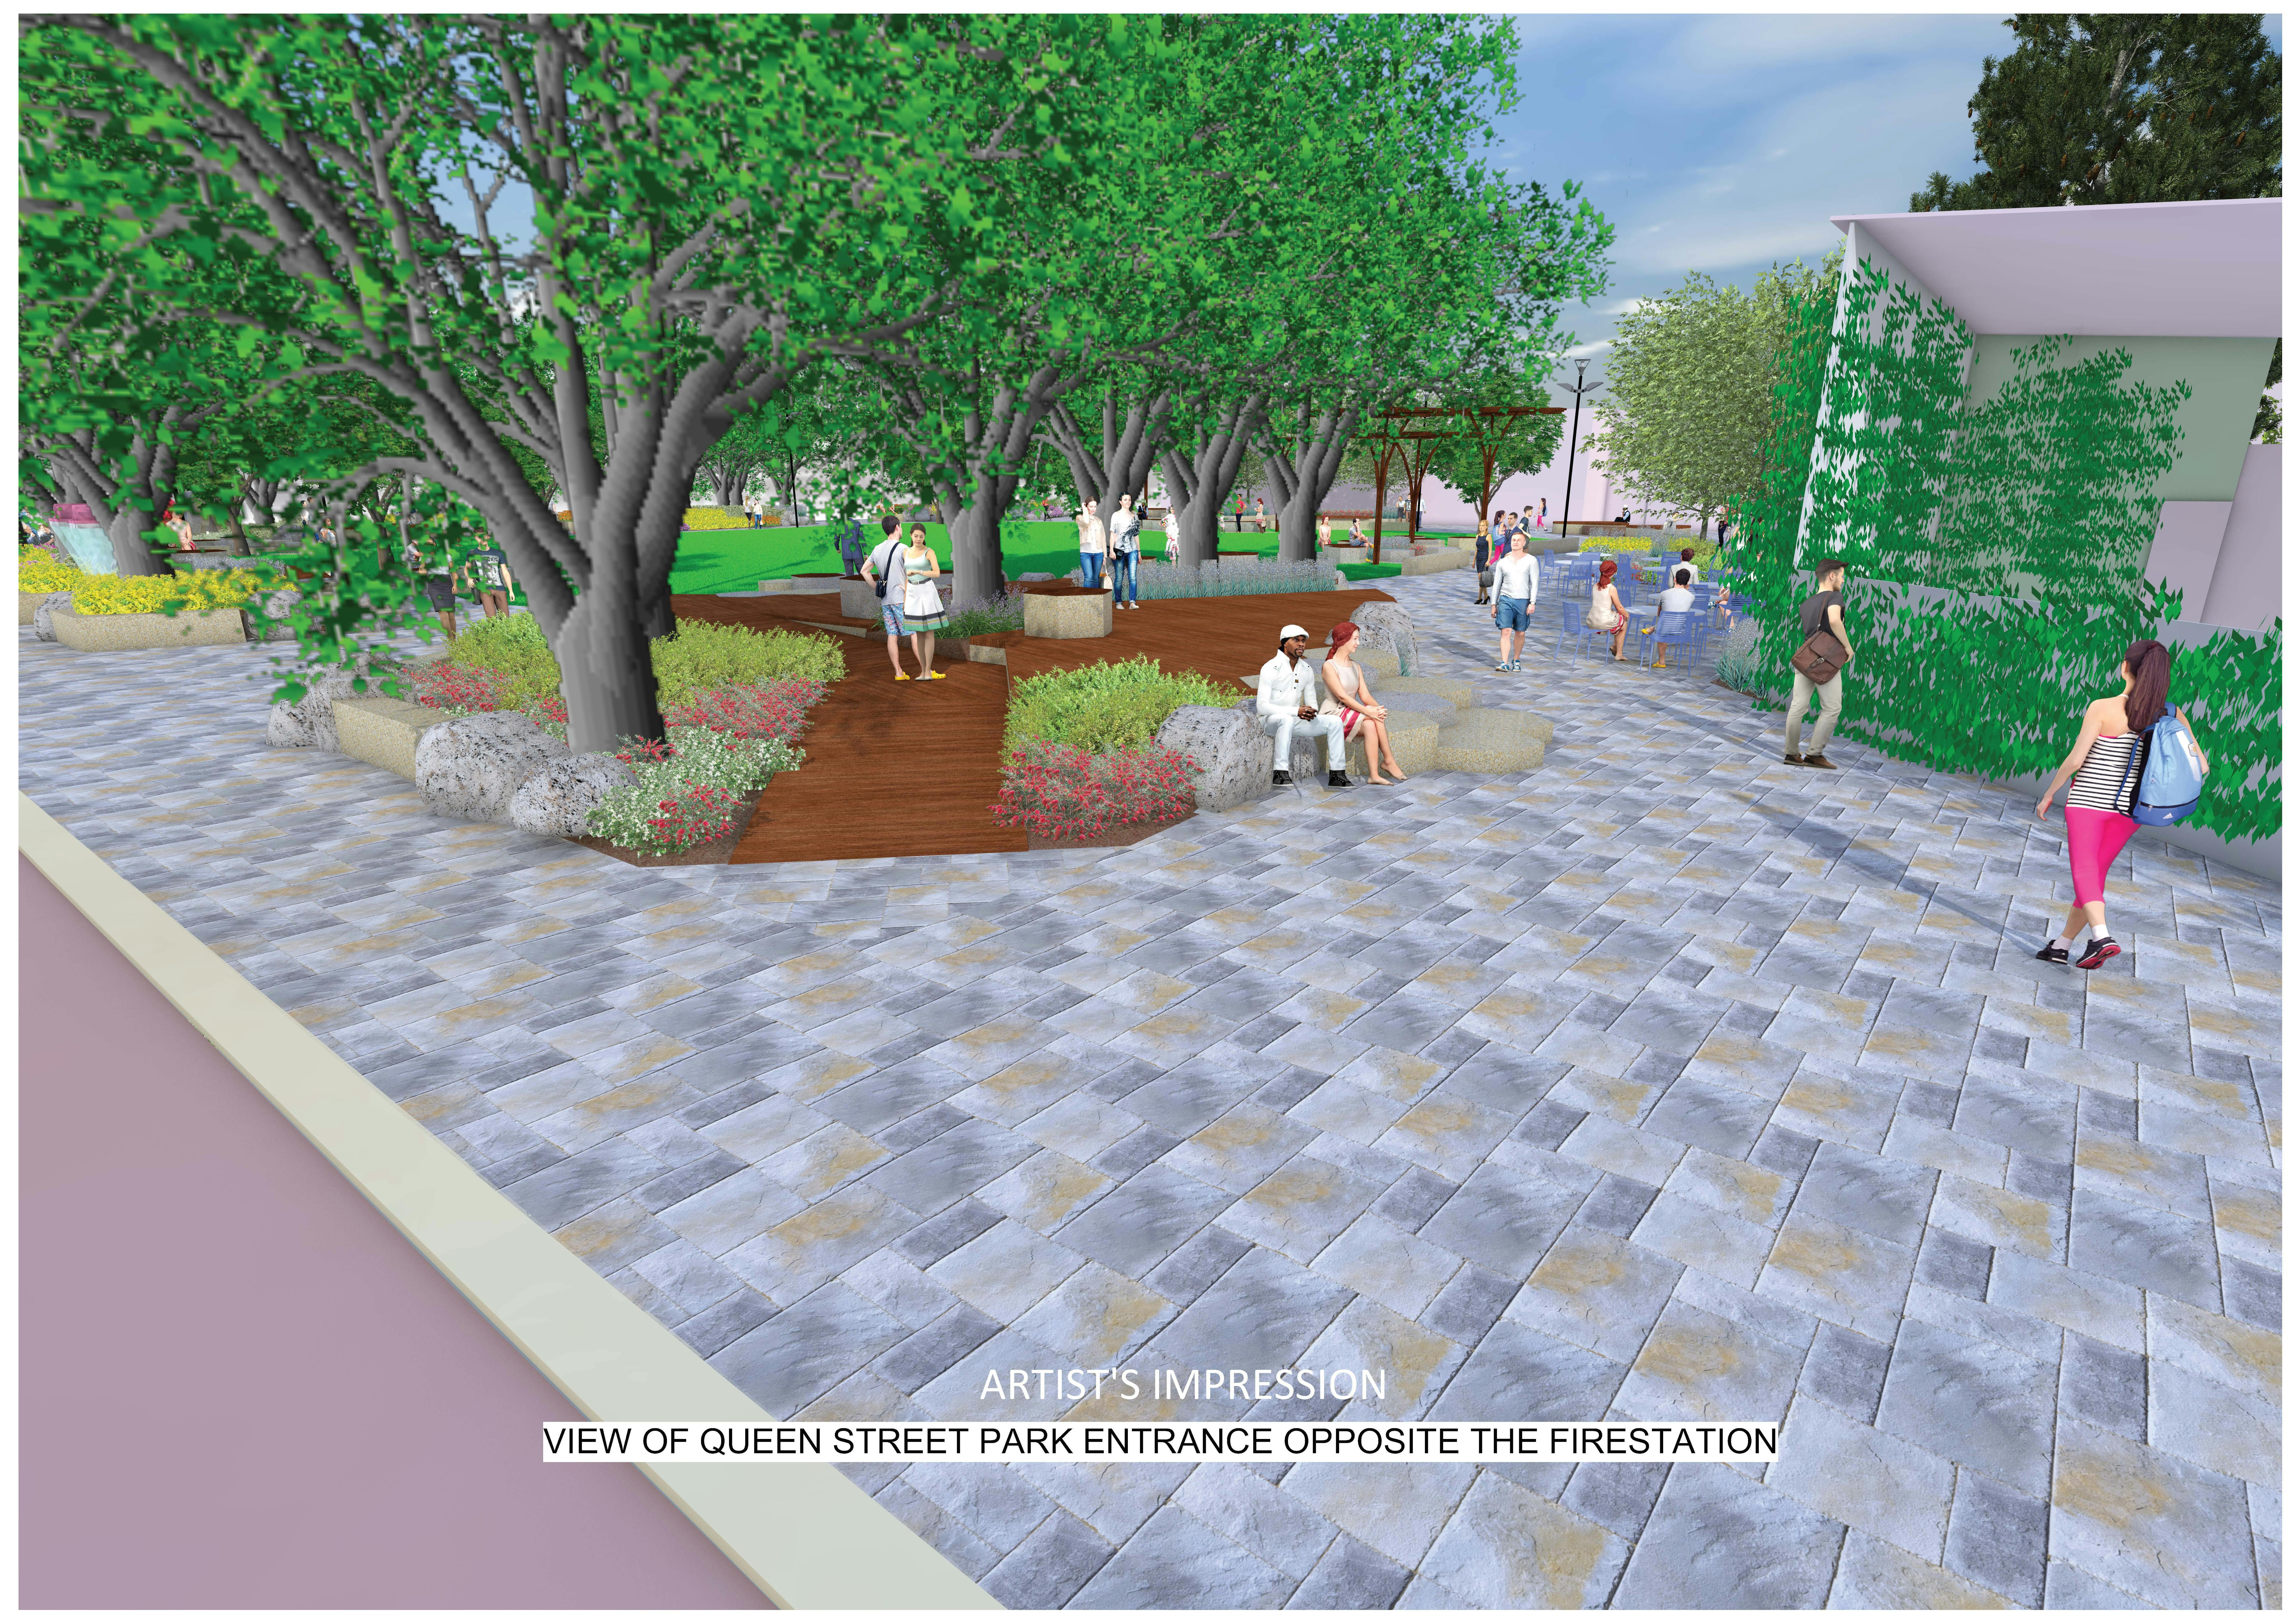 CAMERA D VIEW TO QUEEN ST PARK ENTRY FROM FIRESTATION 5.6.20 v2020 - ARTISTS IMPRESSION.jpg